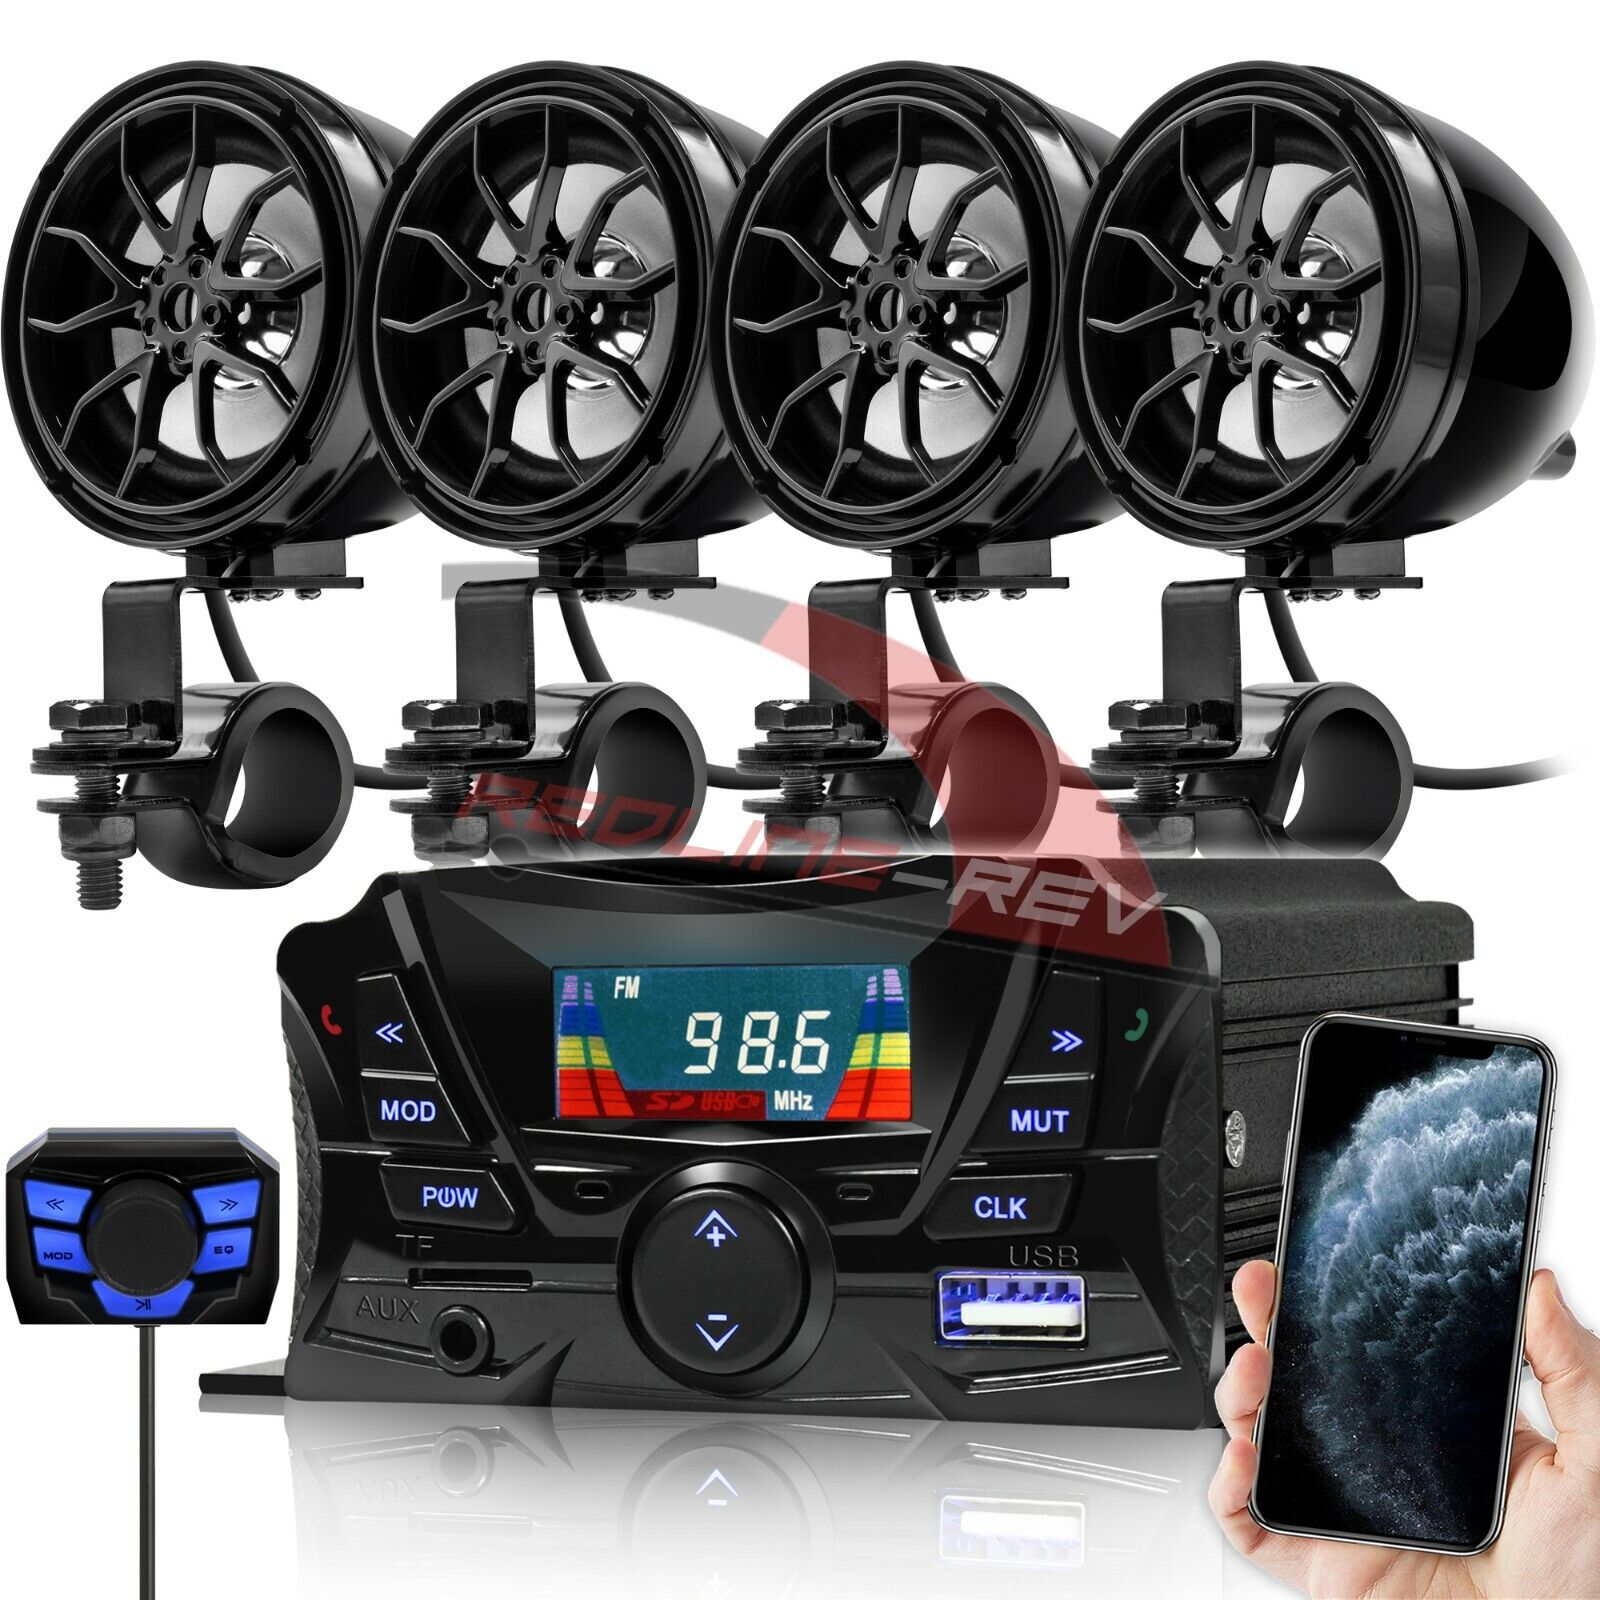 Refurb Bluetooth Motorcycle Stereo Speakers Audio Amplifier System ATV Golf Cart